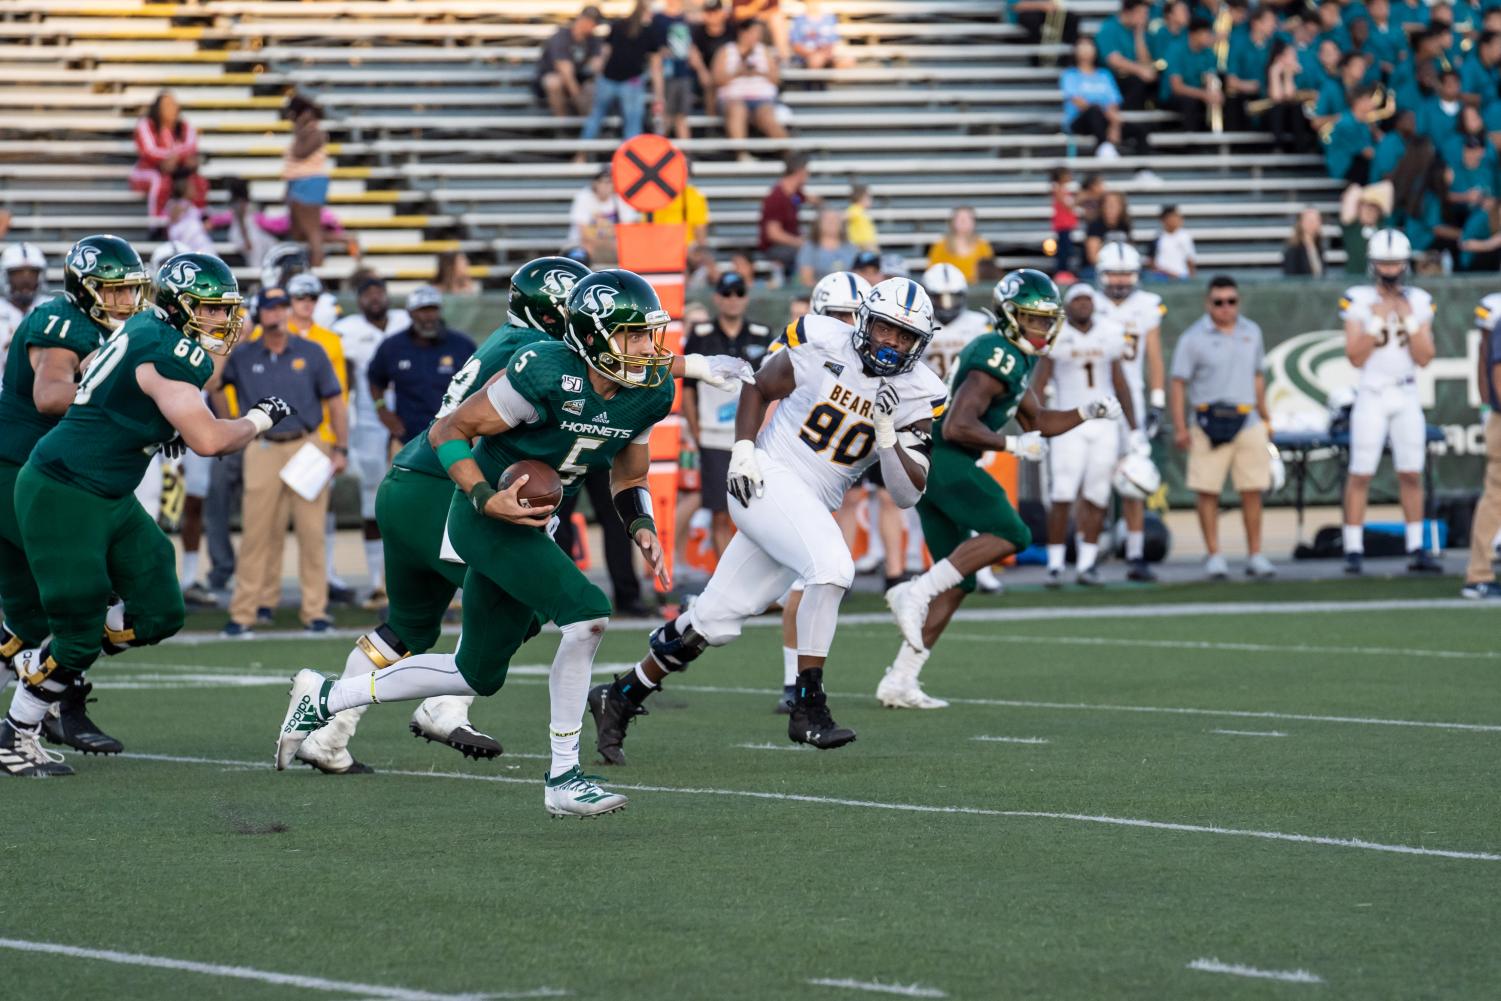 Sac State football team shuts out Northern Colorado 50-0 – The State Hornet